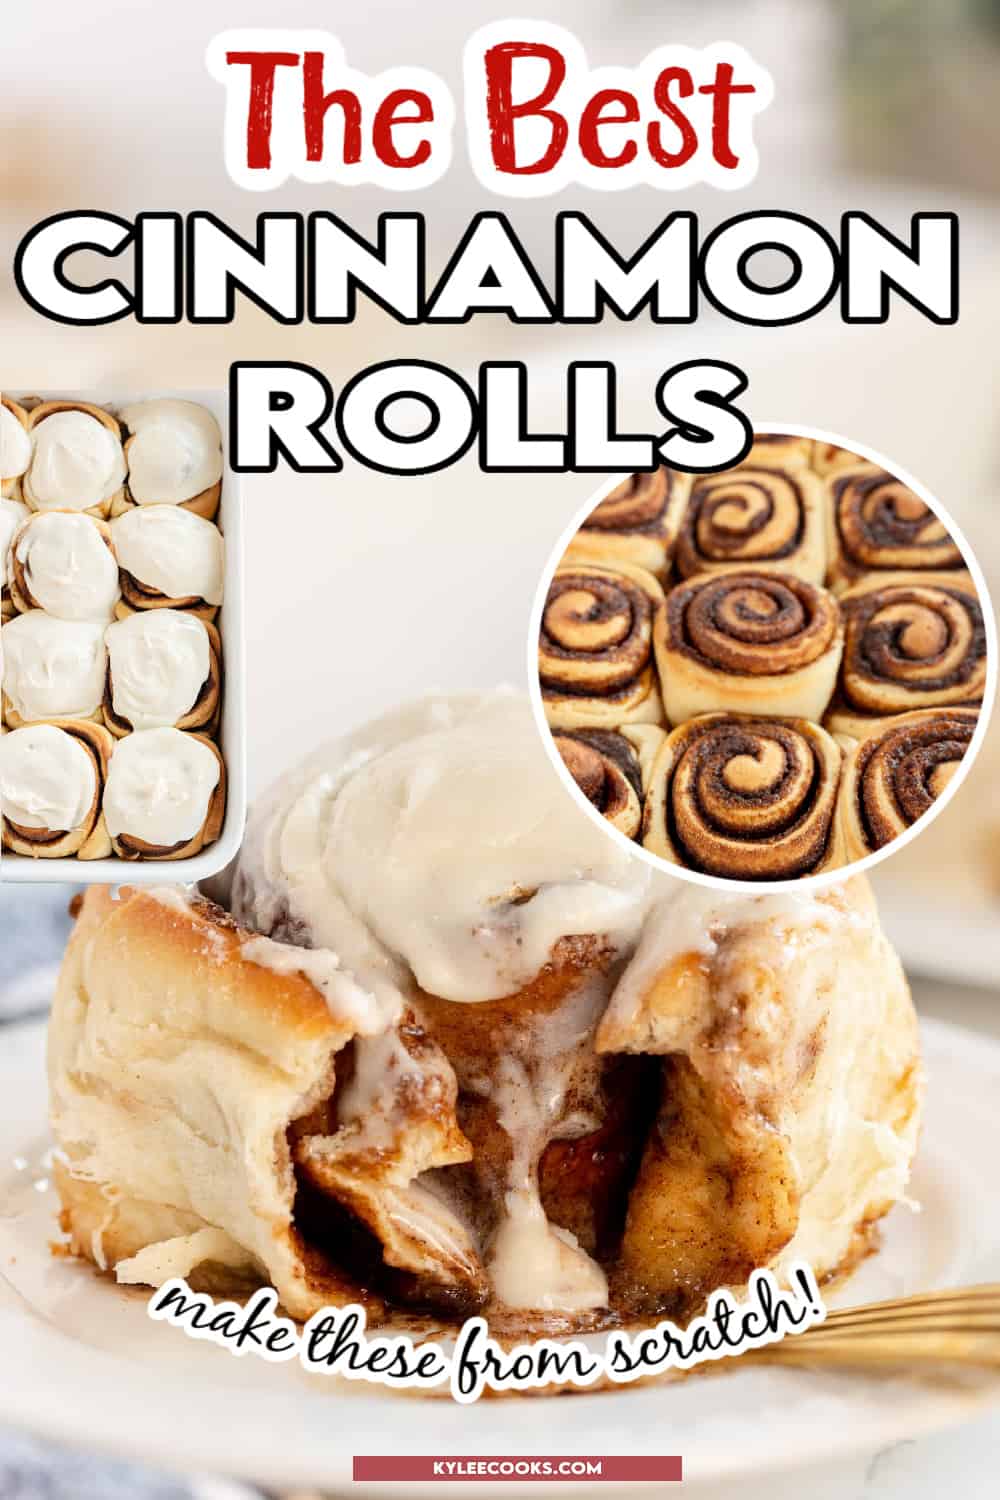 a cinnamon roll, cut open on a plate with recipe name and title overlaid in text.